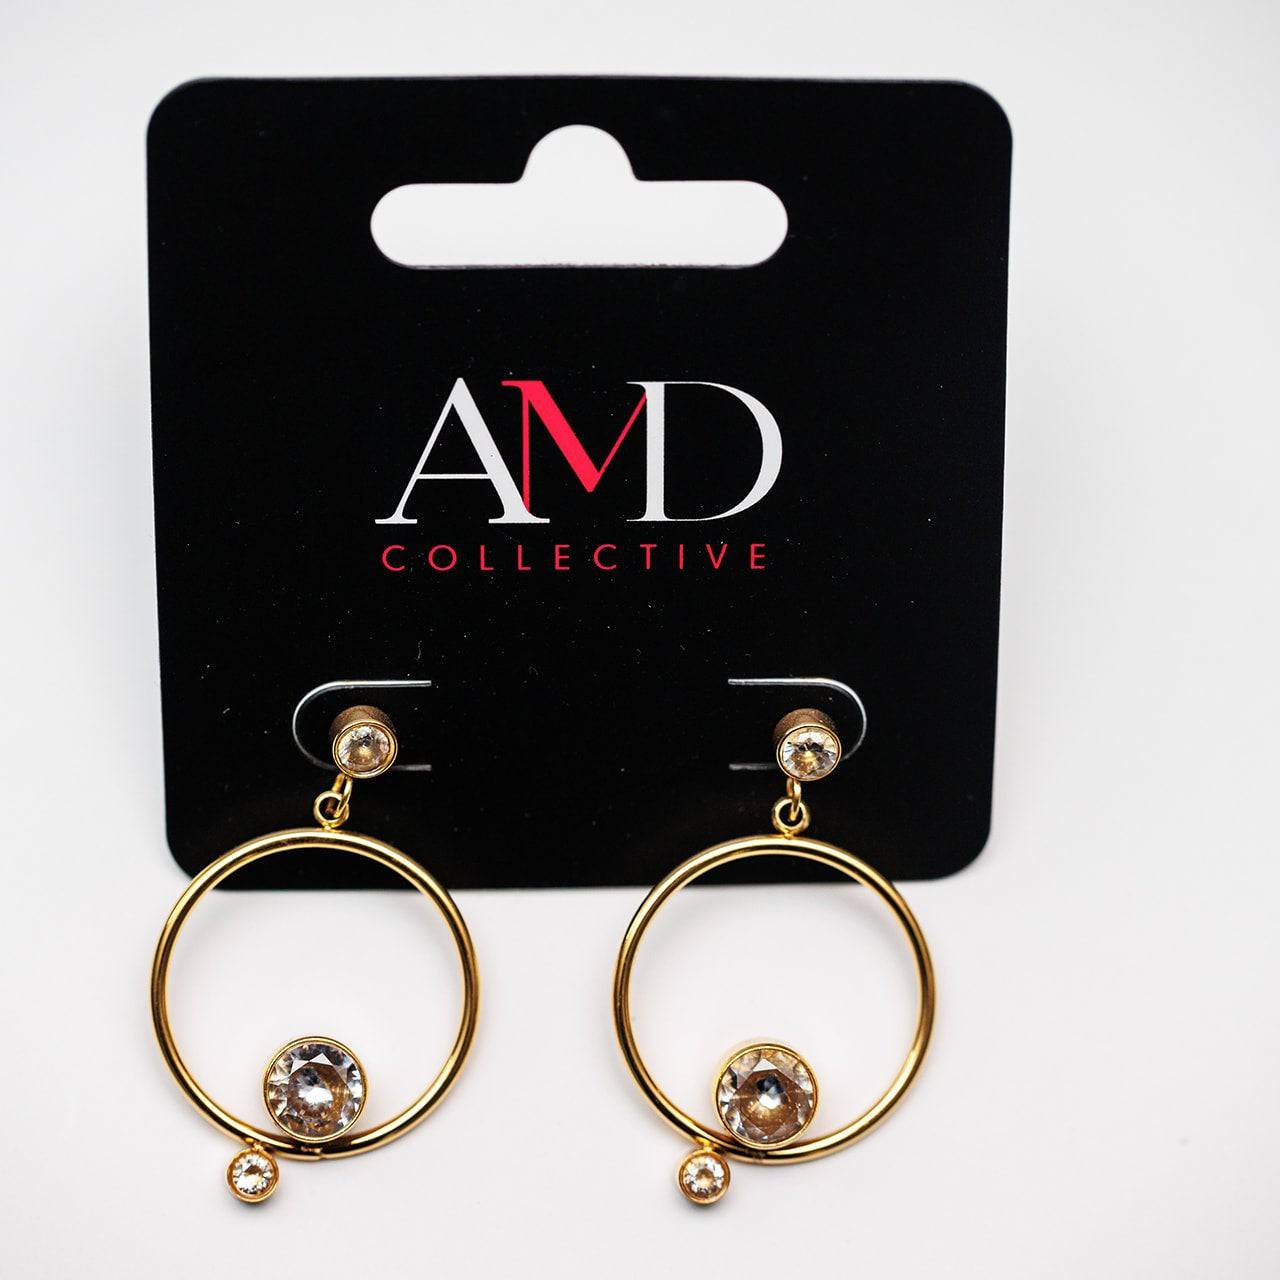 What Goes Round Earrings - AMD COLLECTIVE